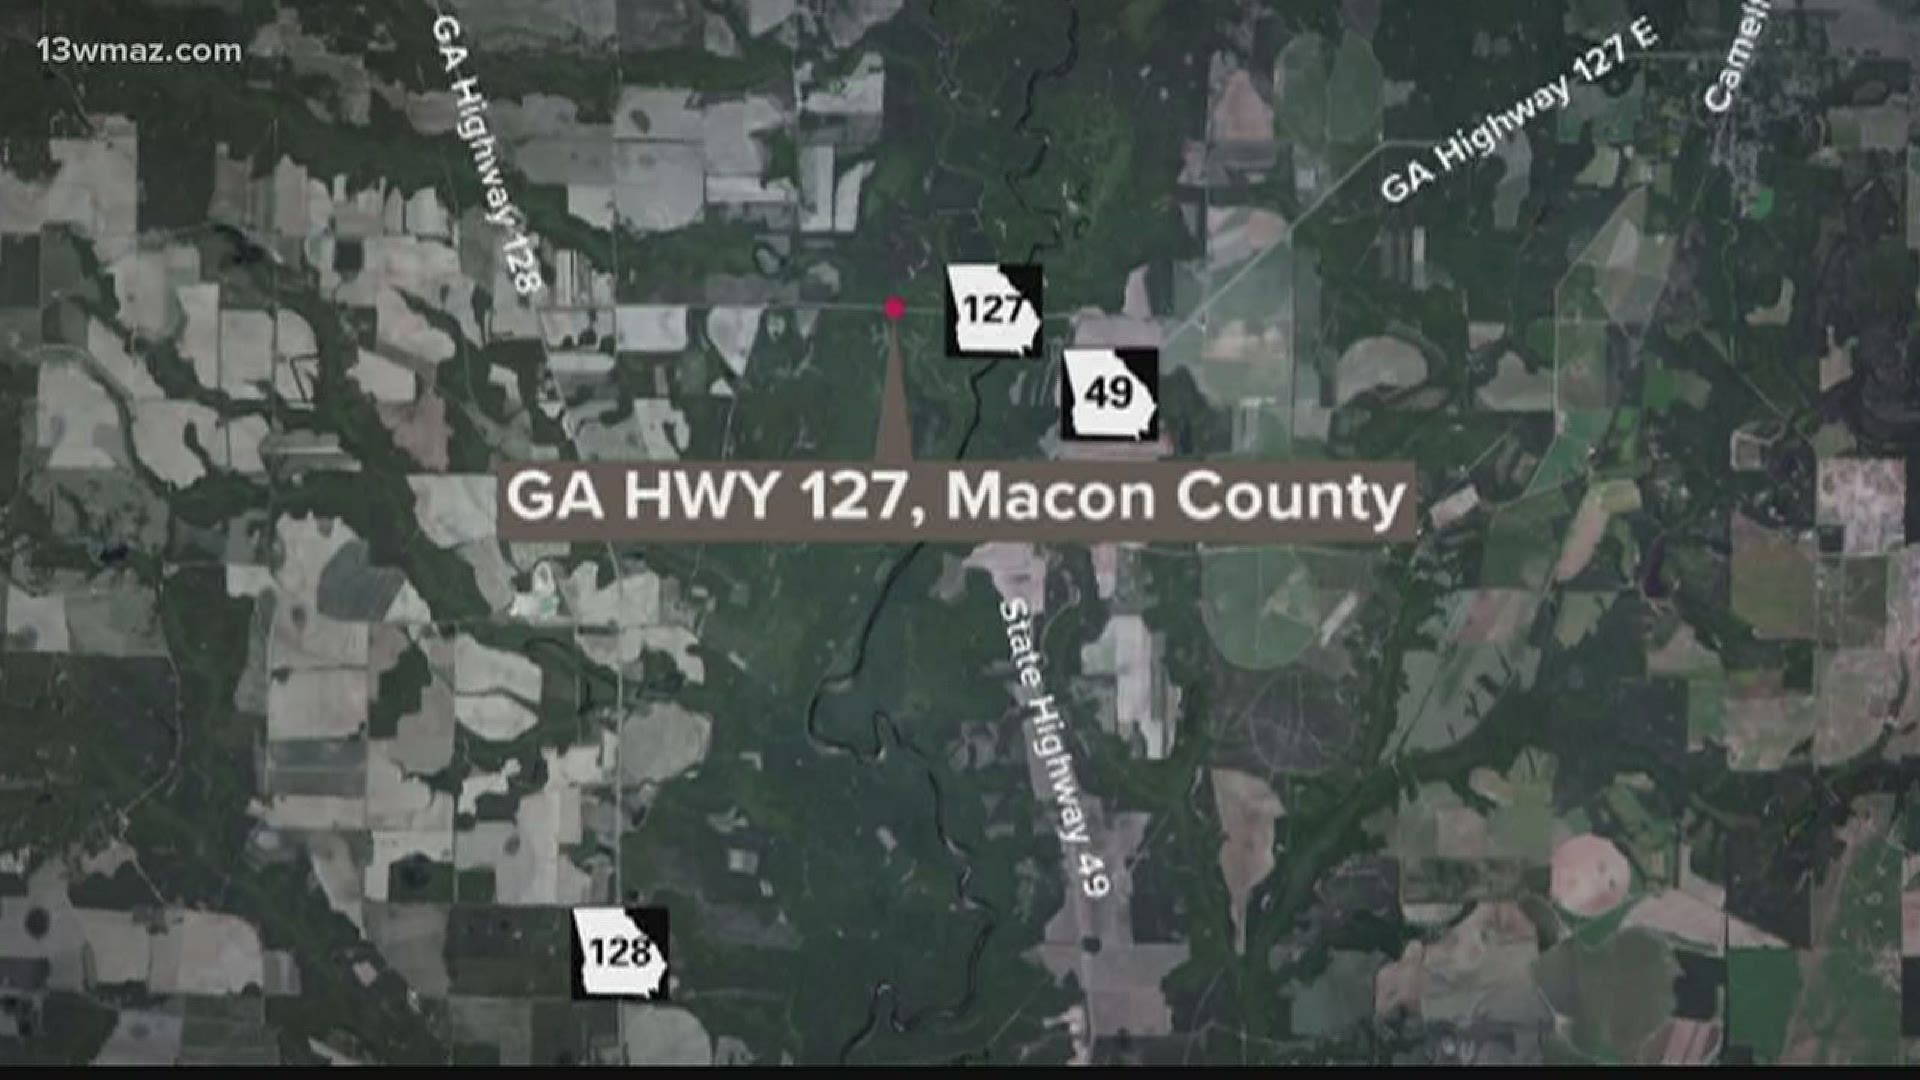 A wreck Saturday in Macon County on Georgia Highway 127 killed two people.